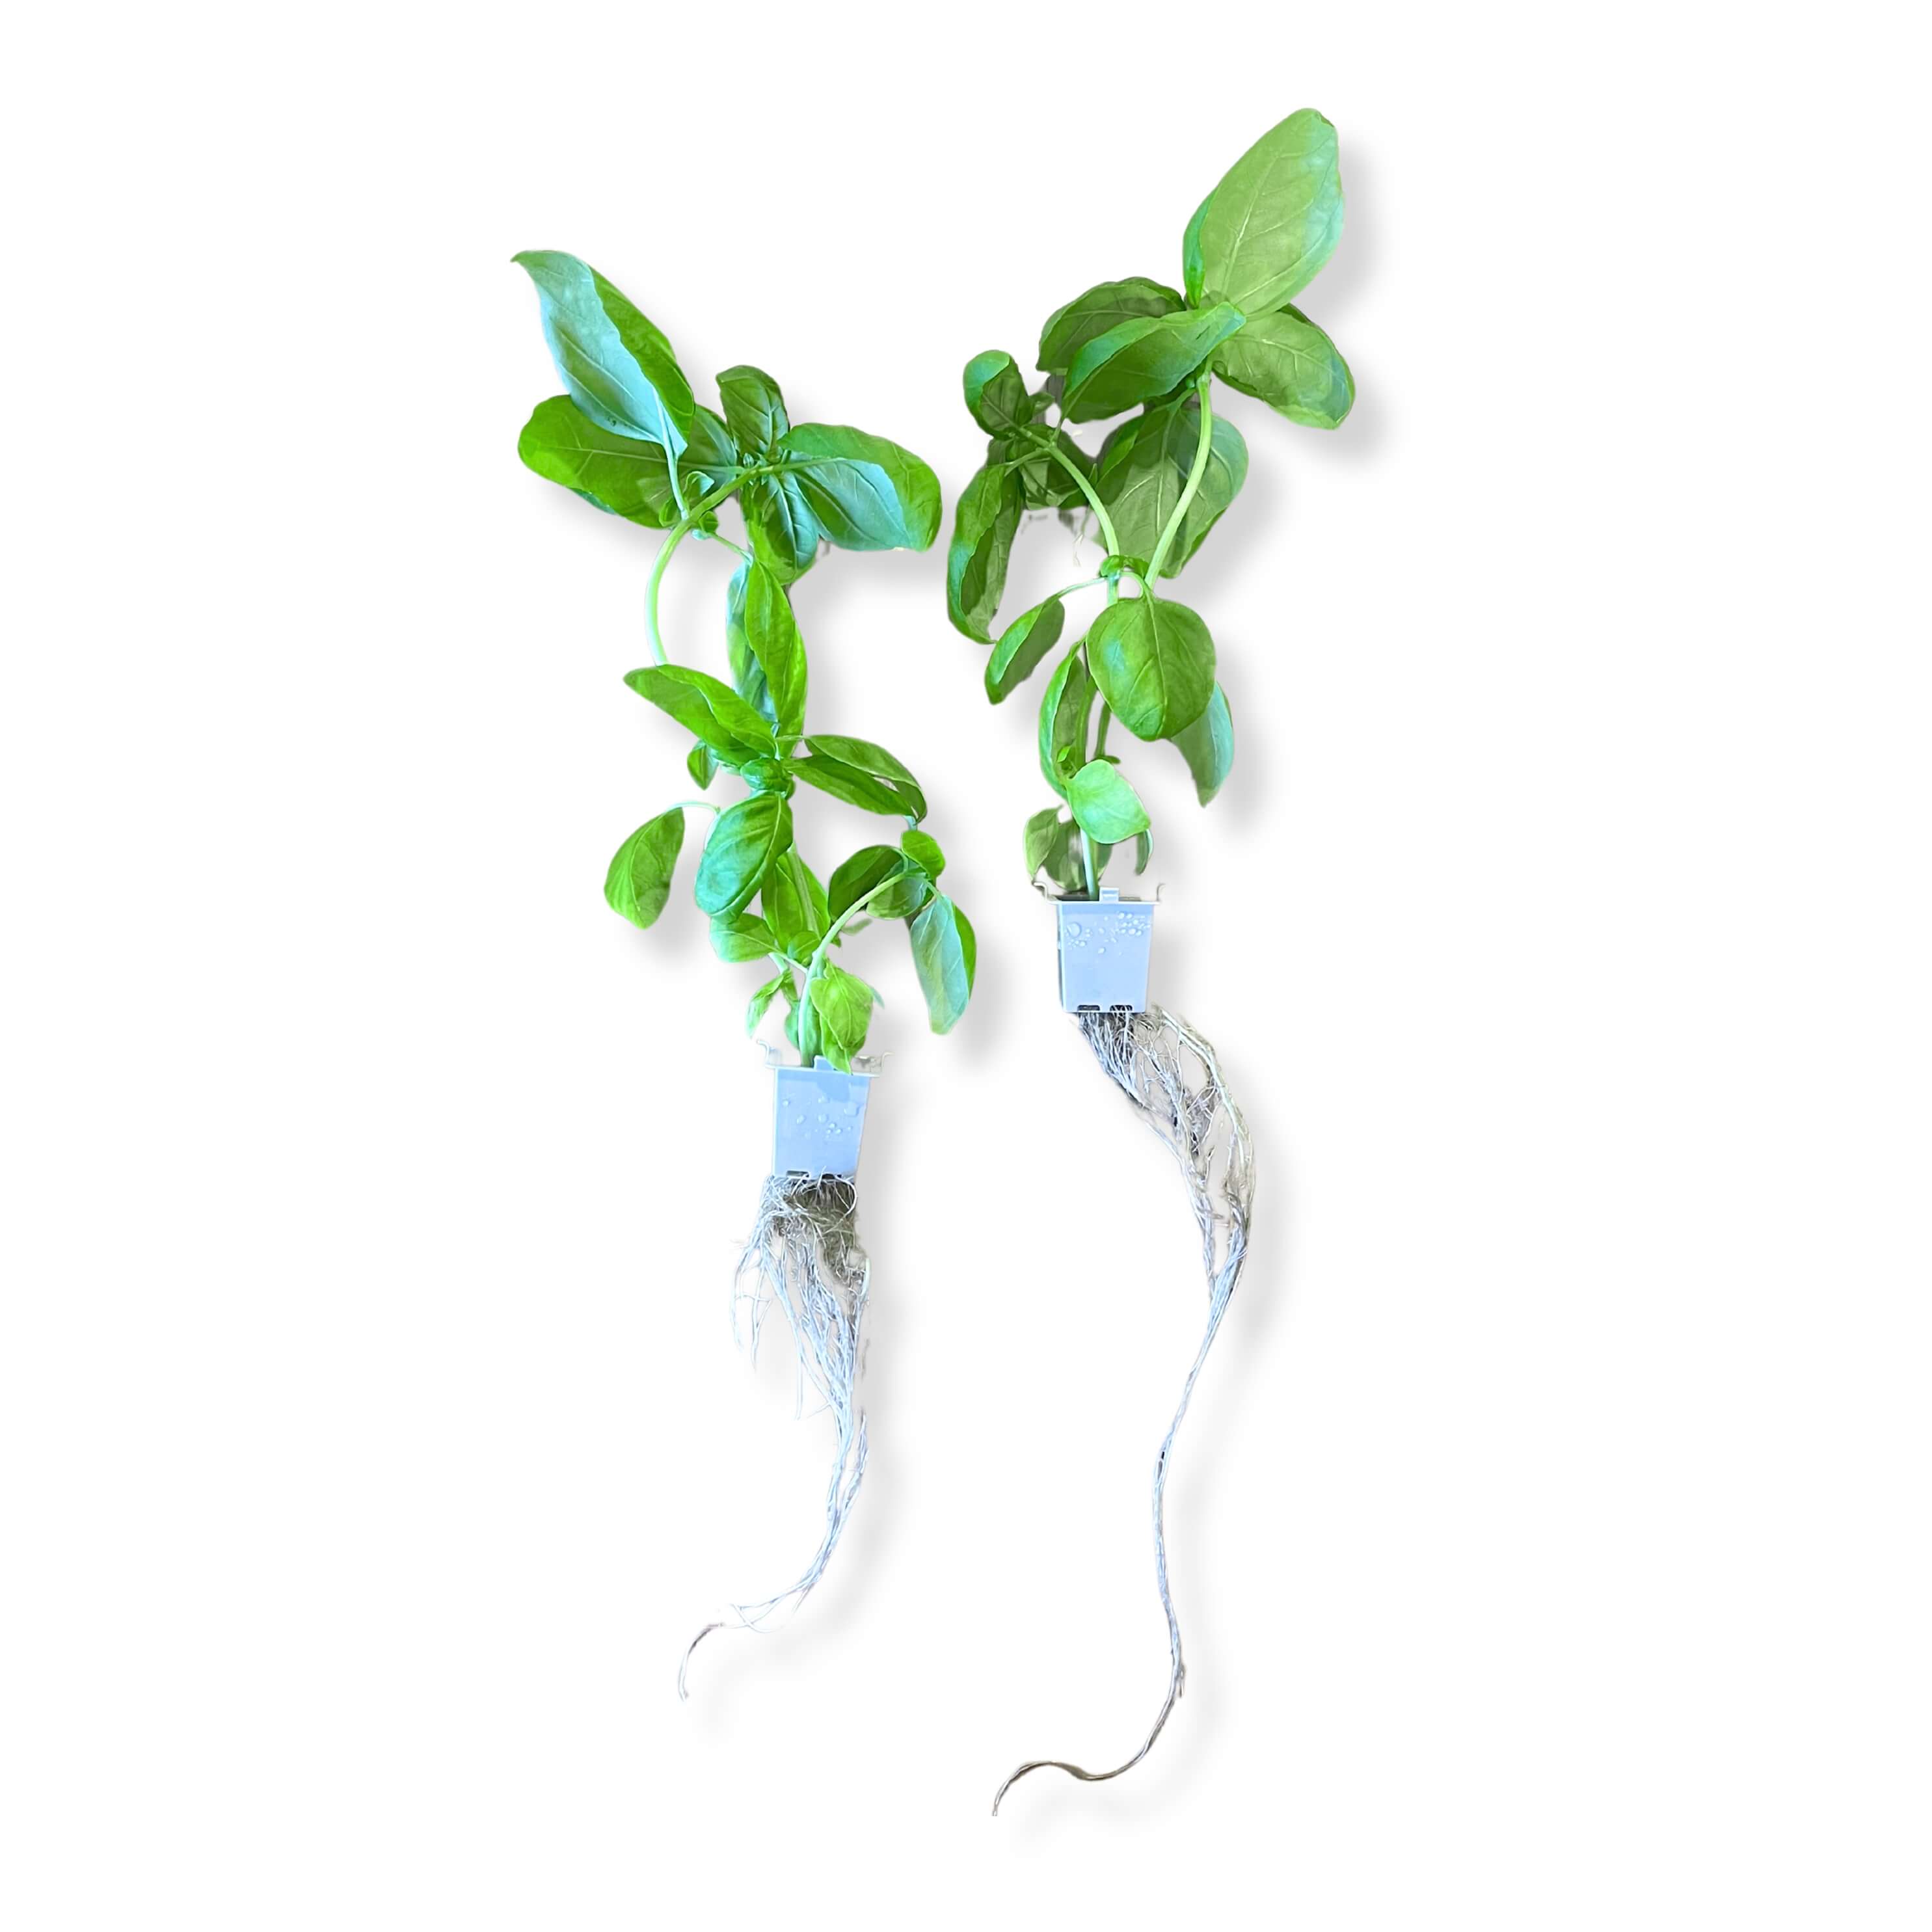 Basil-Genovese(32x - Subscription Only)